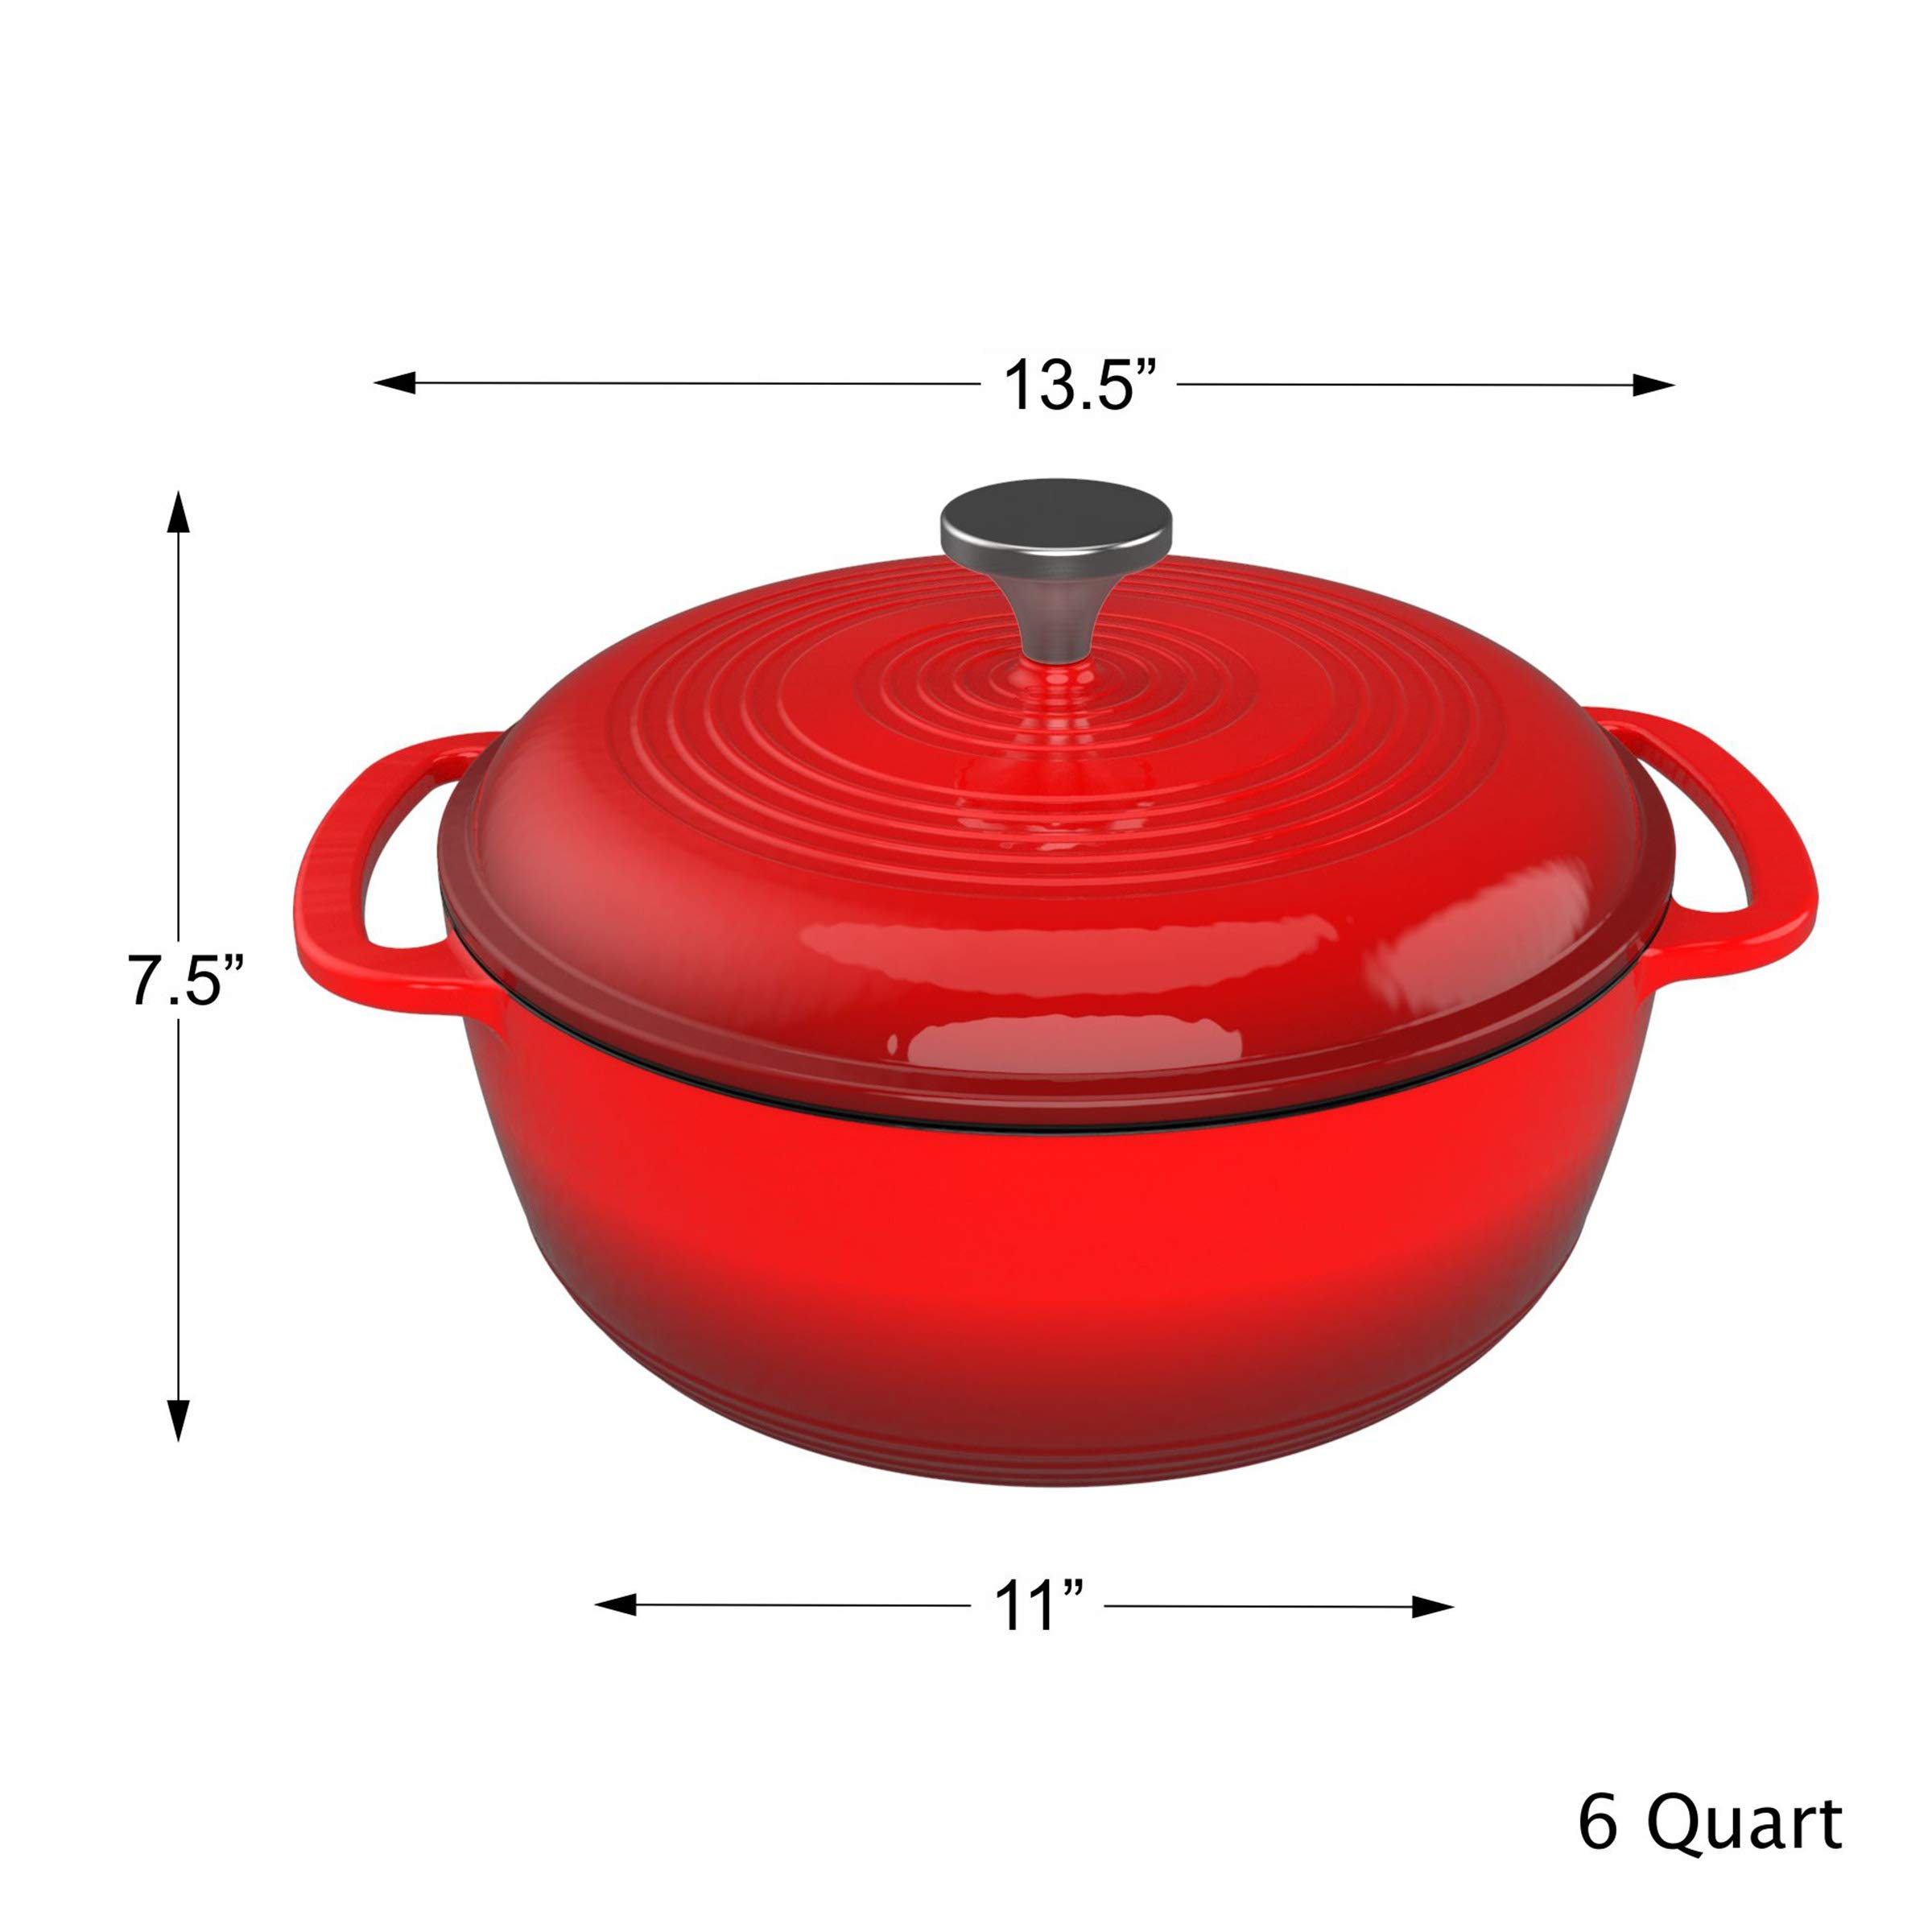 Classic Cuisine Cast Iron Dutch Lid 6 Quart Enamel Coated Oven or Stovetop-For Soup, Chicken, Pot Roast and More-Kitchen Cookware, Red